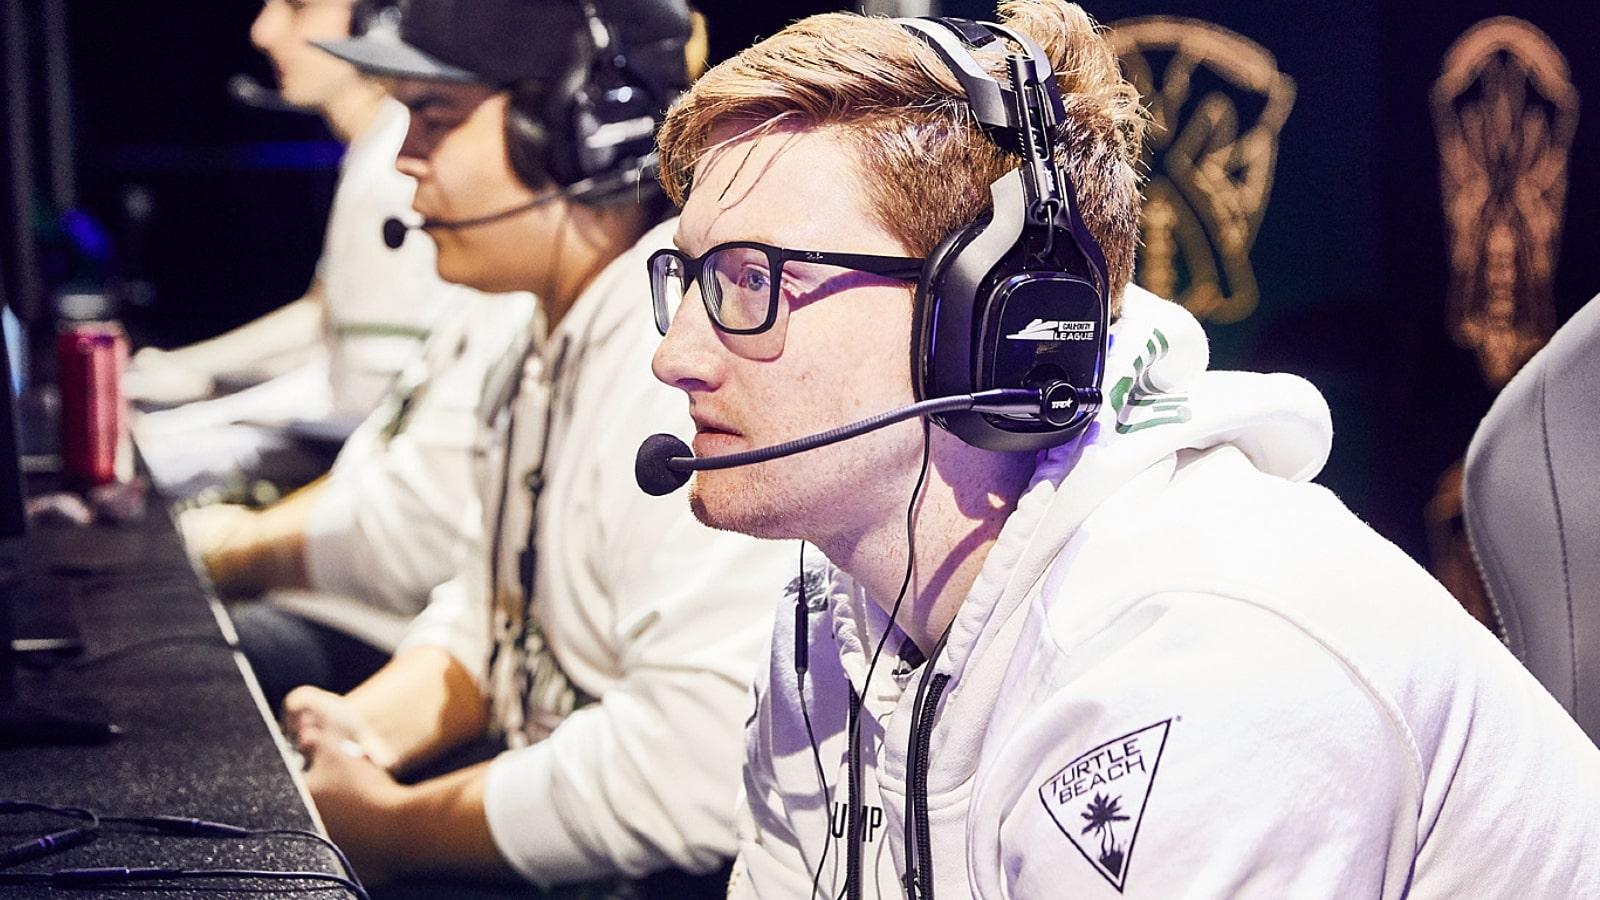 Scump playing for Chicago CDL LAN